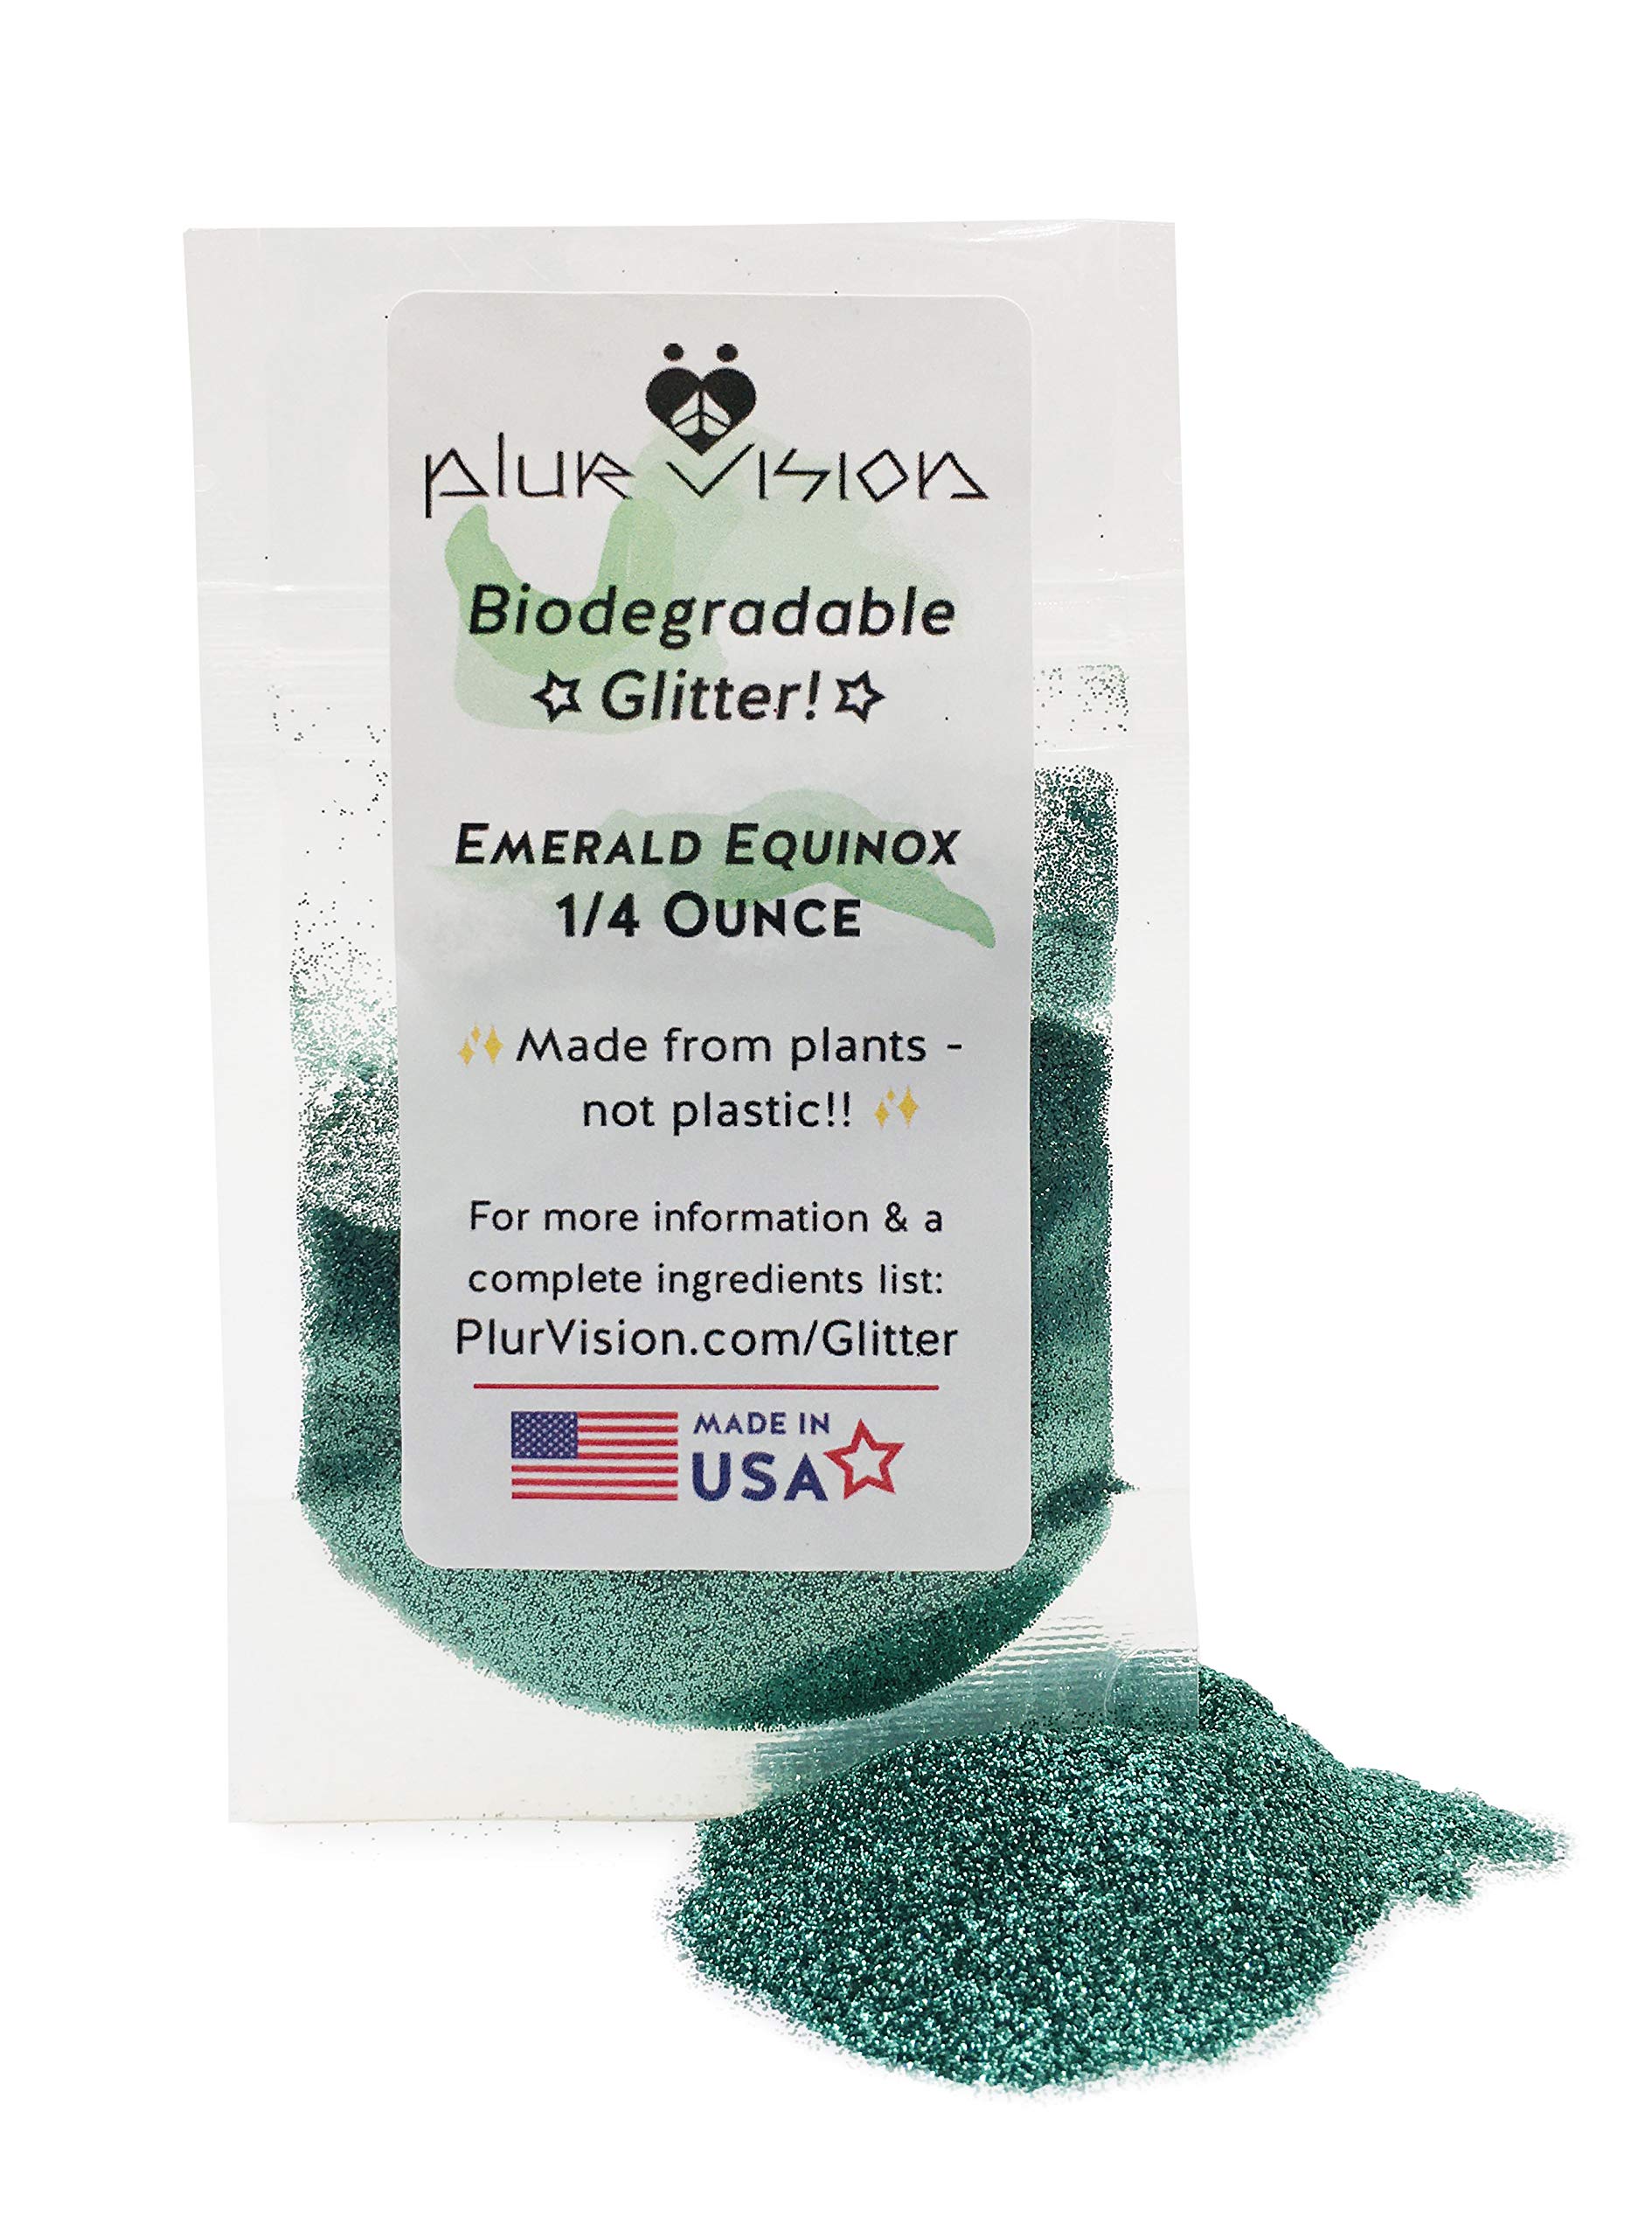 Emerald Equinox Biodegradable Glitter 1/4 Ounce - Made from Plant Cellulose, Earth Friendly. Perfect for Body, Cosmetics, Crafts, DIY Projects. Can be Mixed with Lotions, Gels, Oils, Face 0.25 Ounce of 1) Emerald